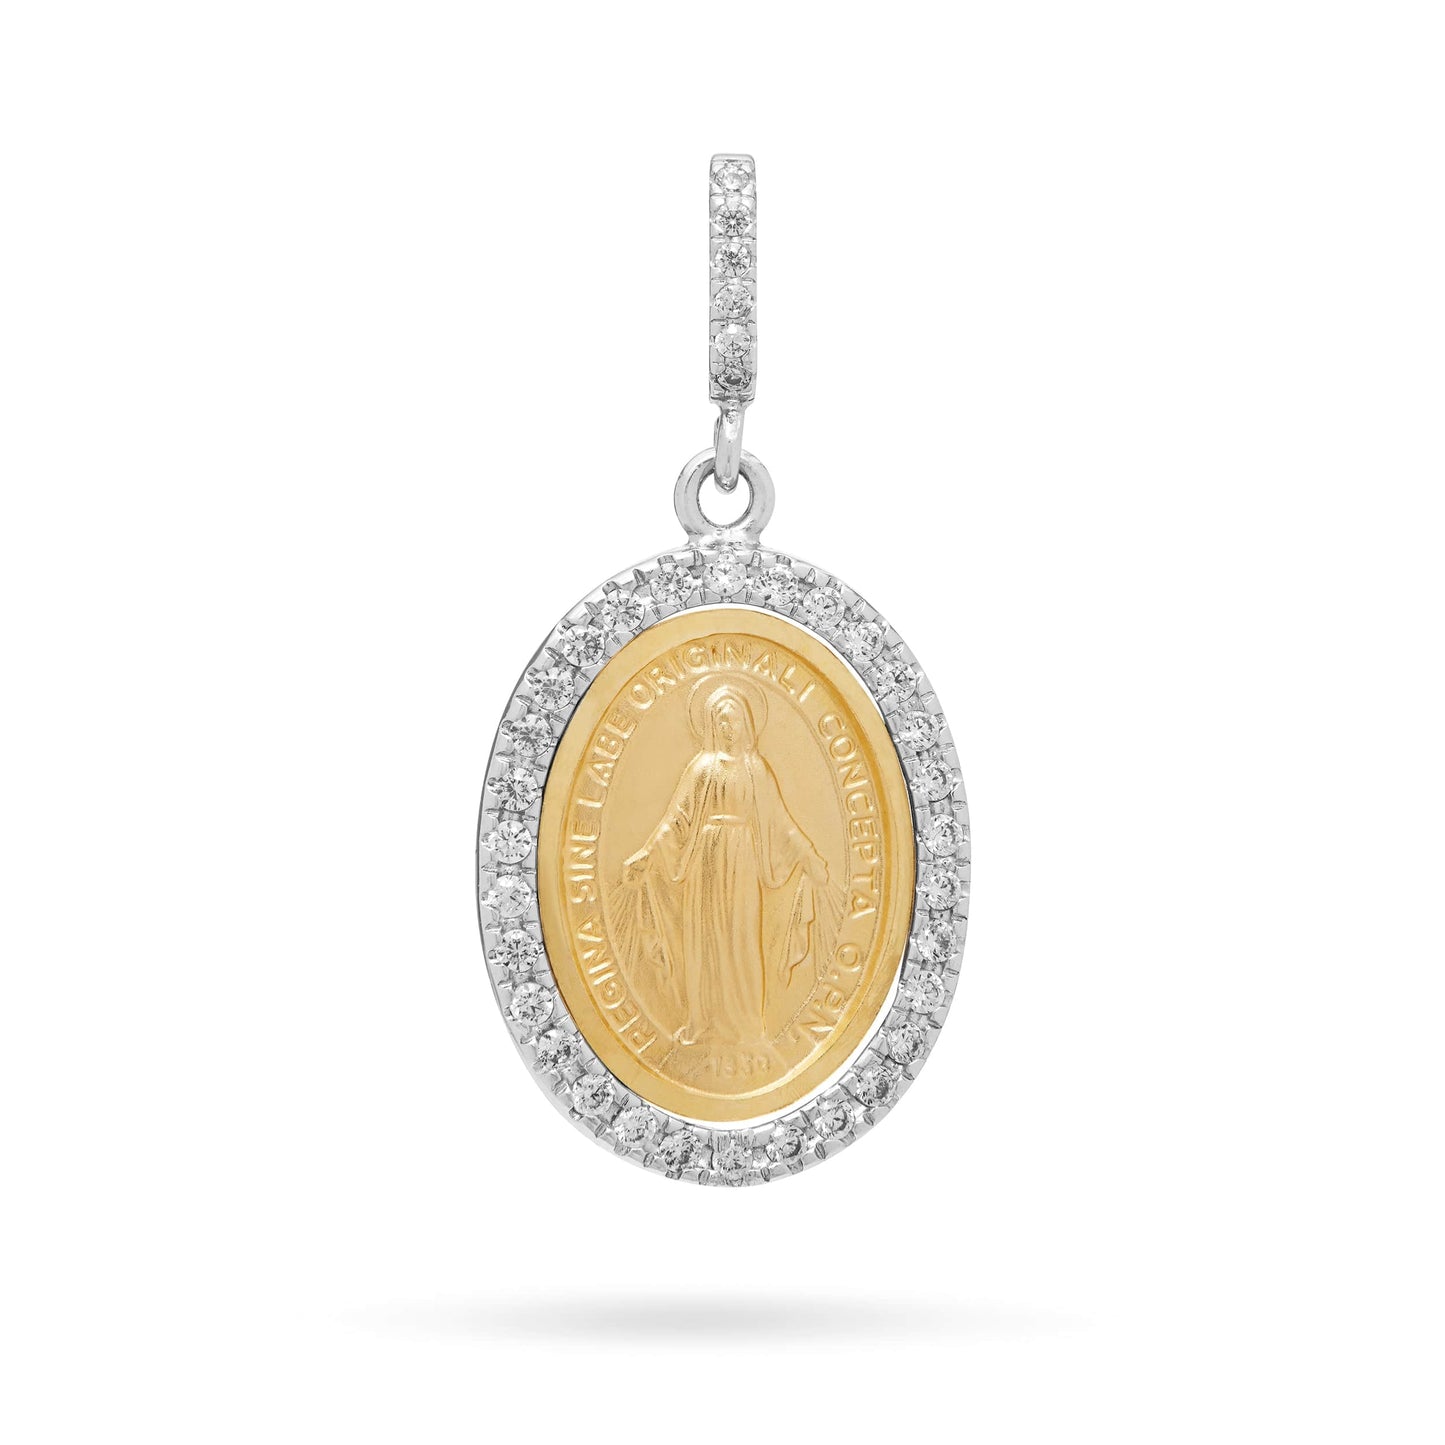 MONDO CATTOLICO Our Lady of Miraculous Bicolor Zircons Gold Medal